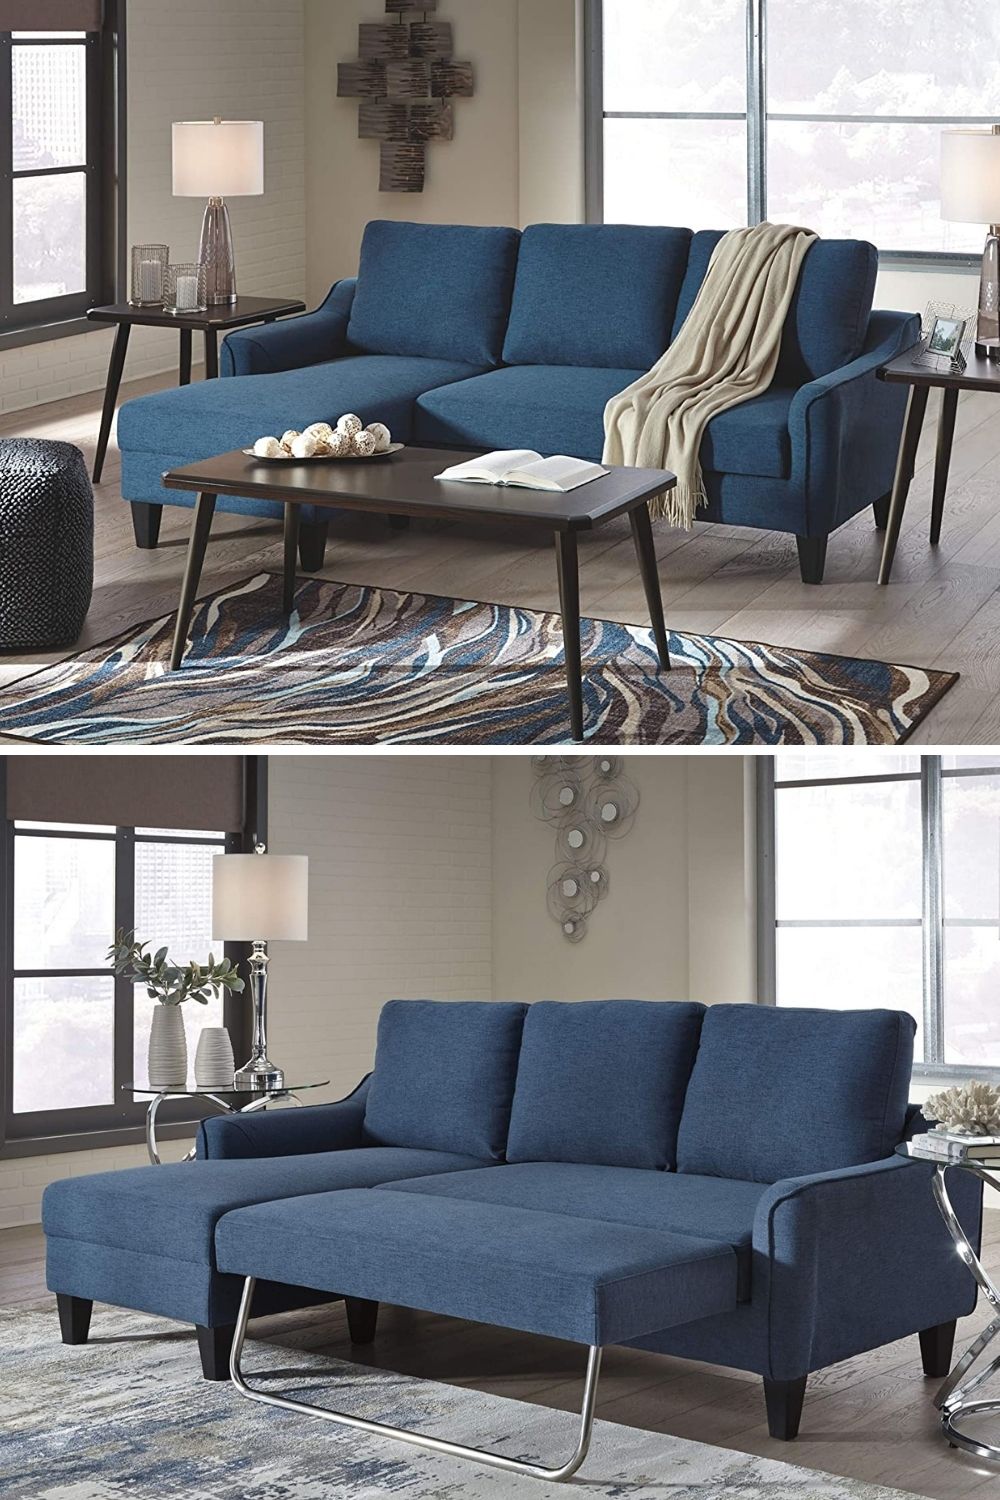 Blue Sectional Sleeper Sofa For Small Apartments 